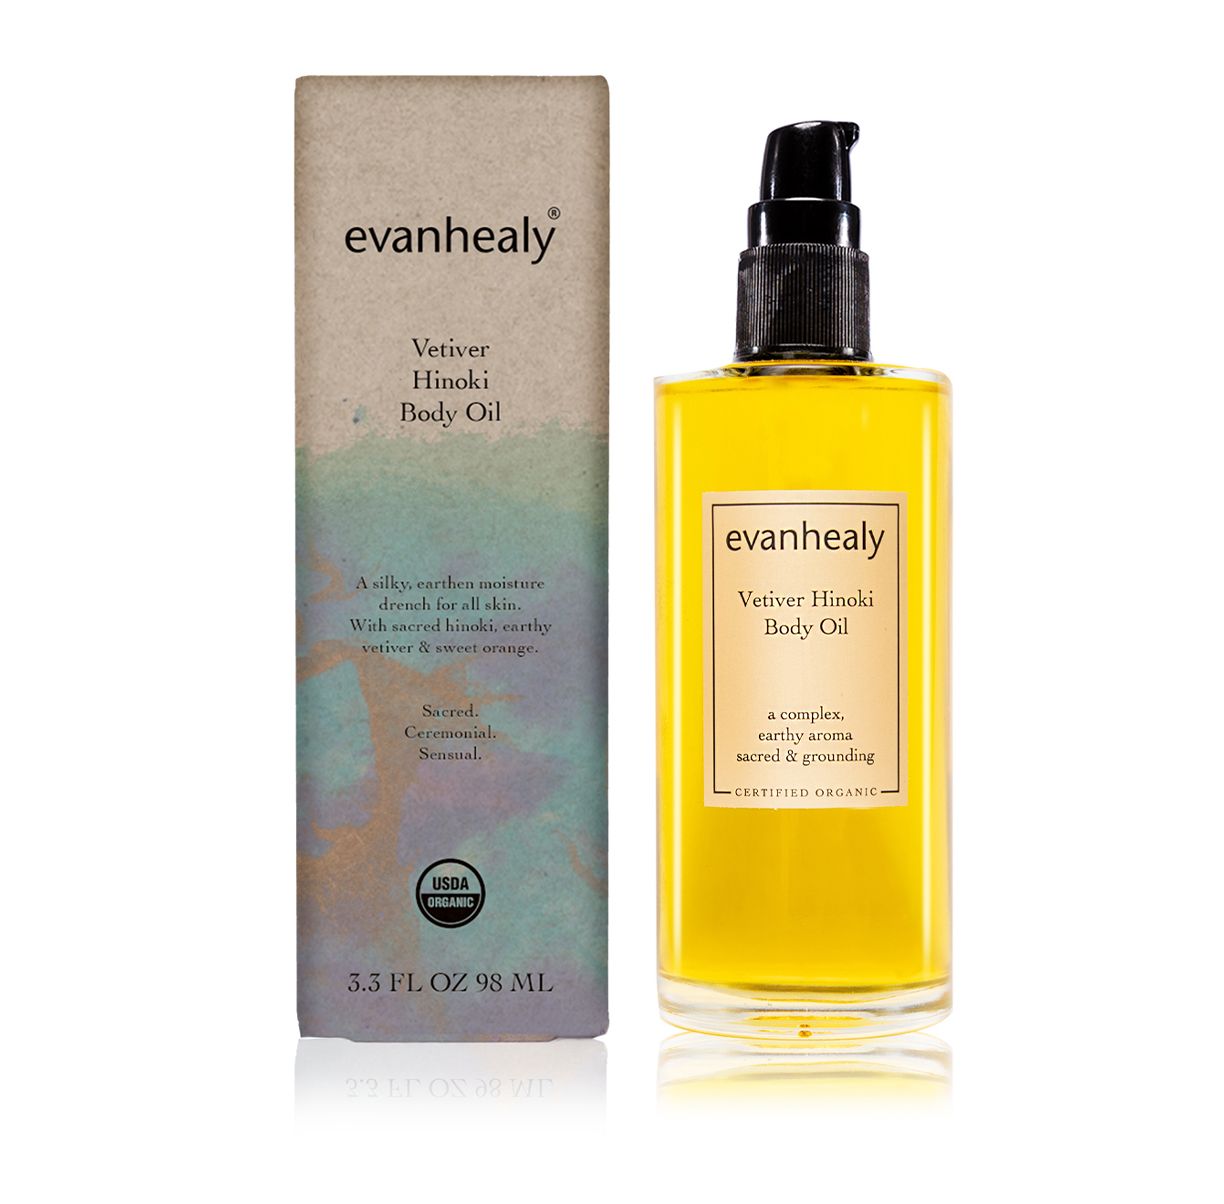 evanhealy vetiver hinoki body oil for skincare with box